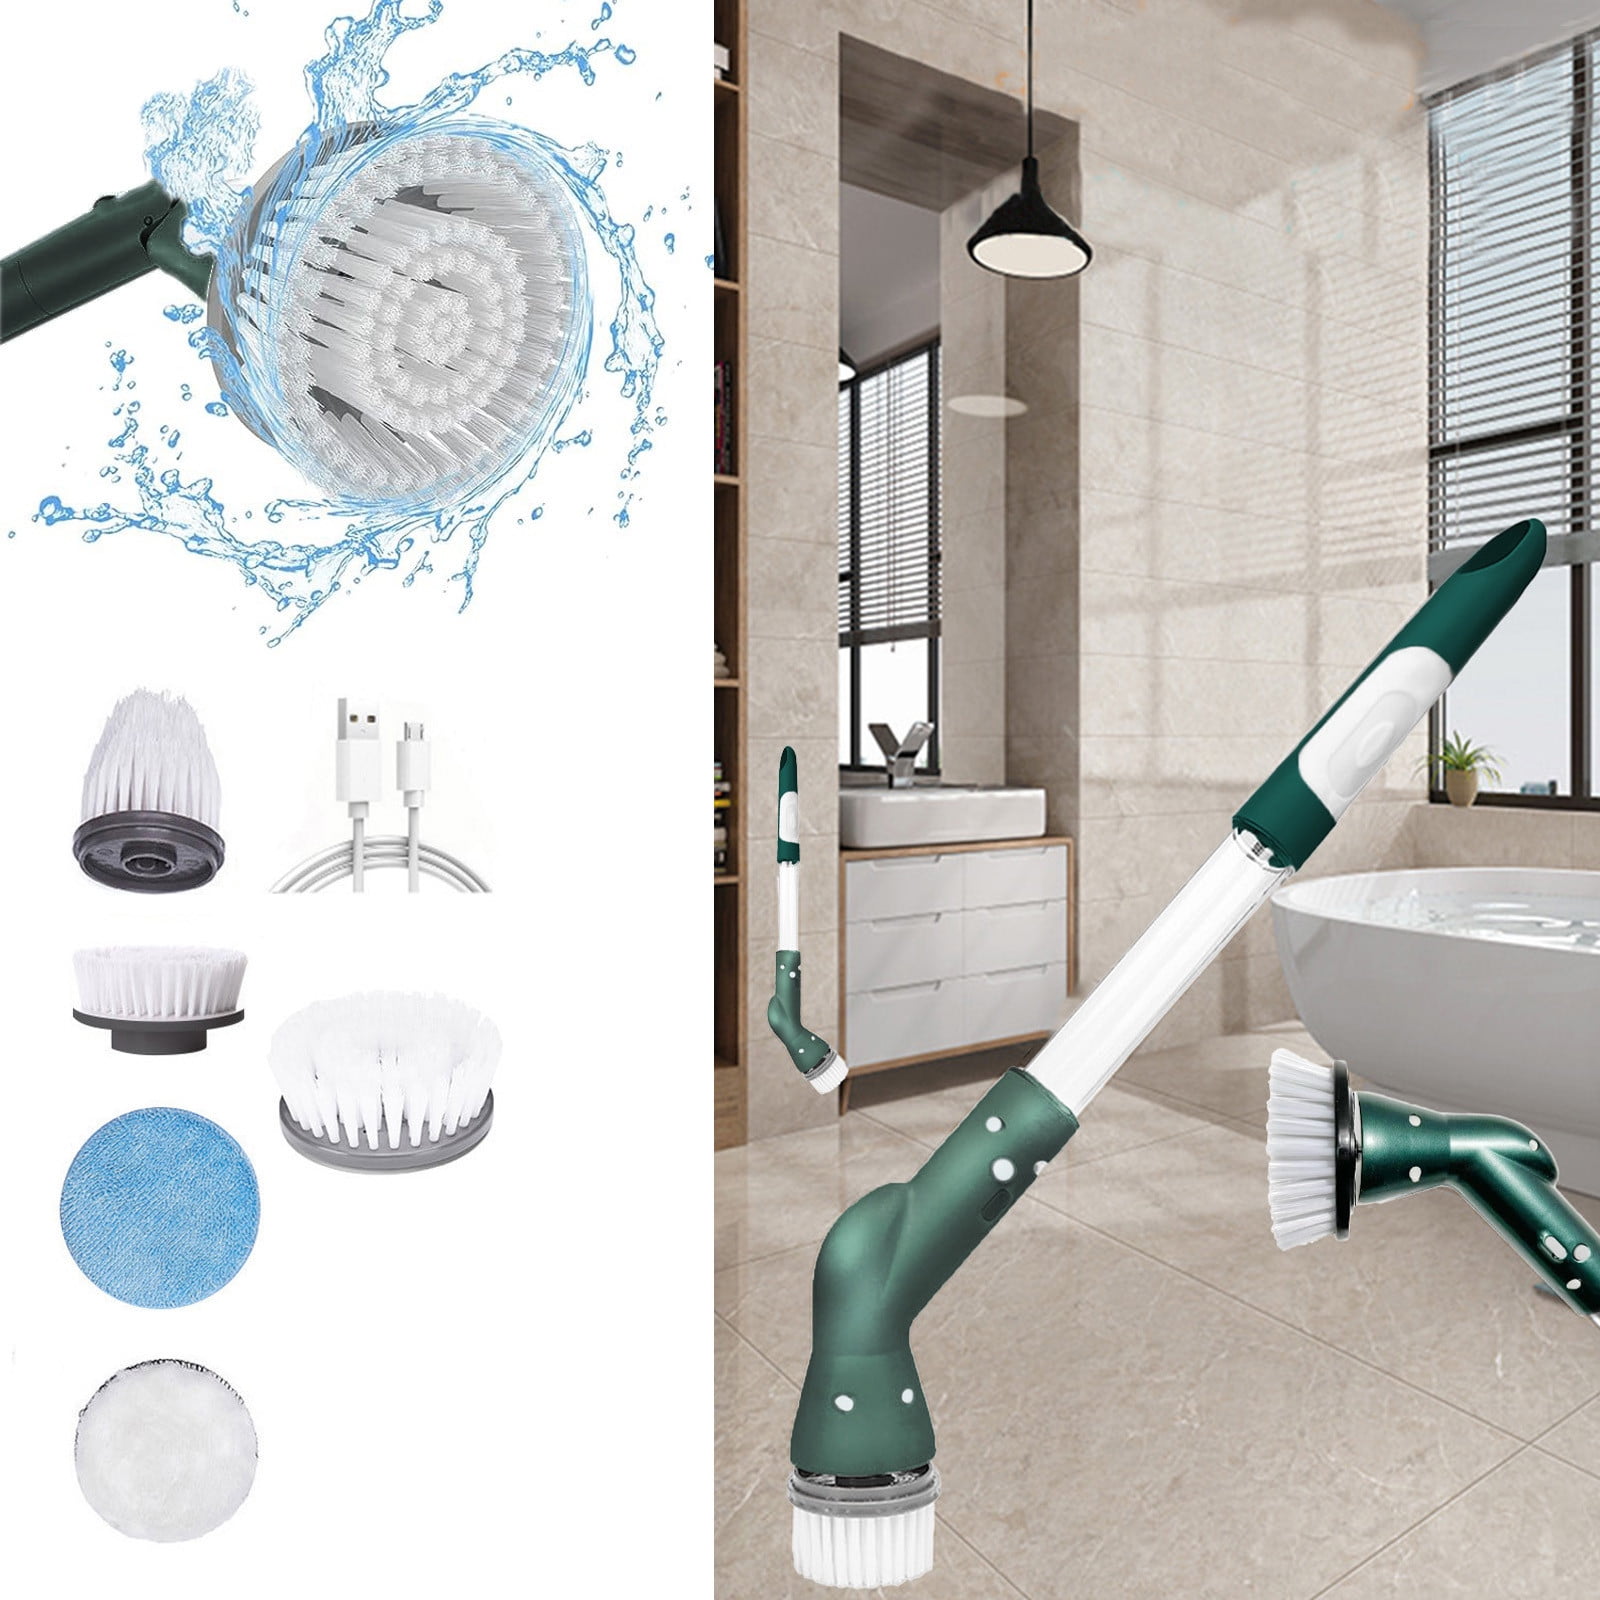  crgrtght Electric Spin Scrubbers,Cordless Spin Scrubbers with 5  Replaceable Brush Heads and Adjust Extension Handle,Online Shopping,Power  Cleaning Brush for Bathroom Floor Tile : Sports & Outdoors